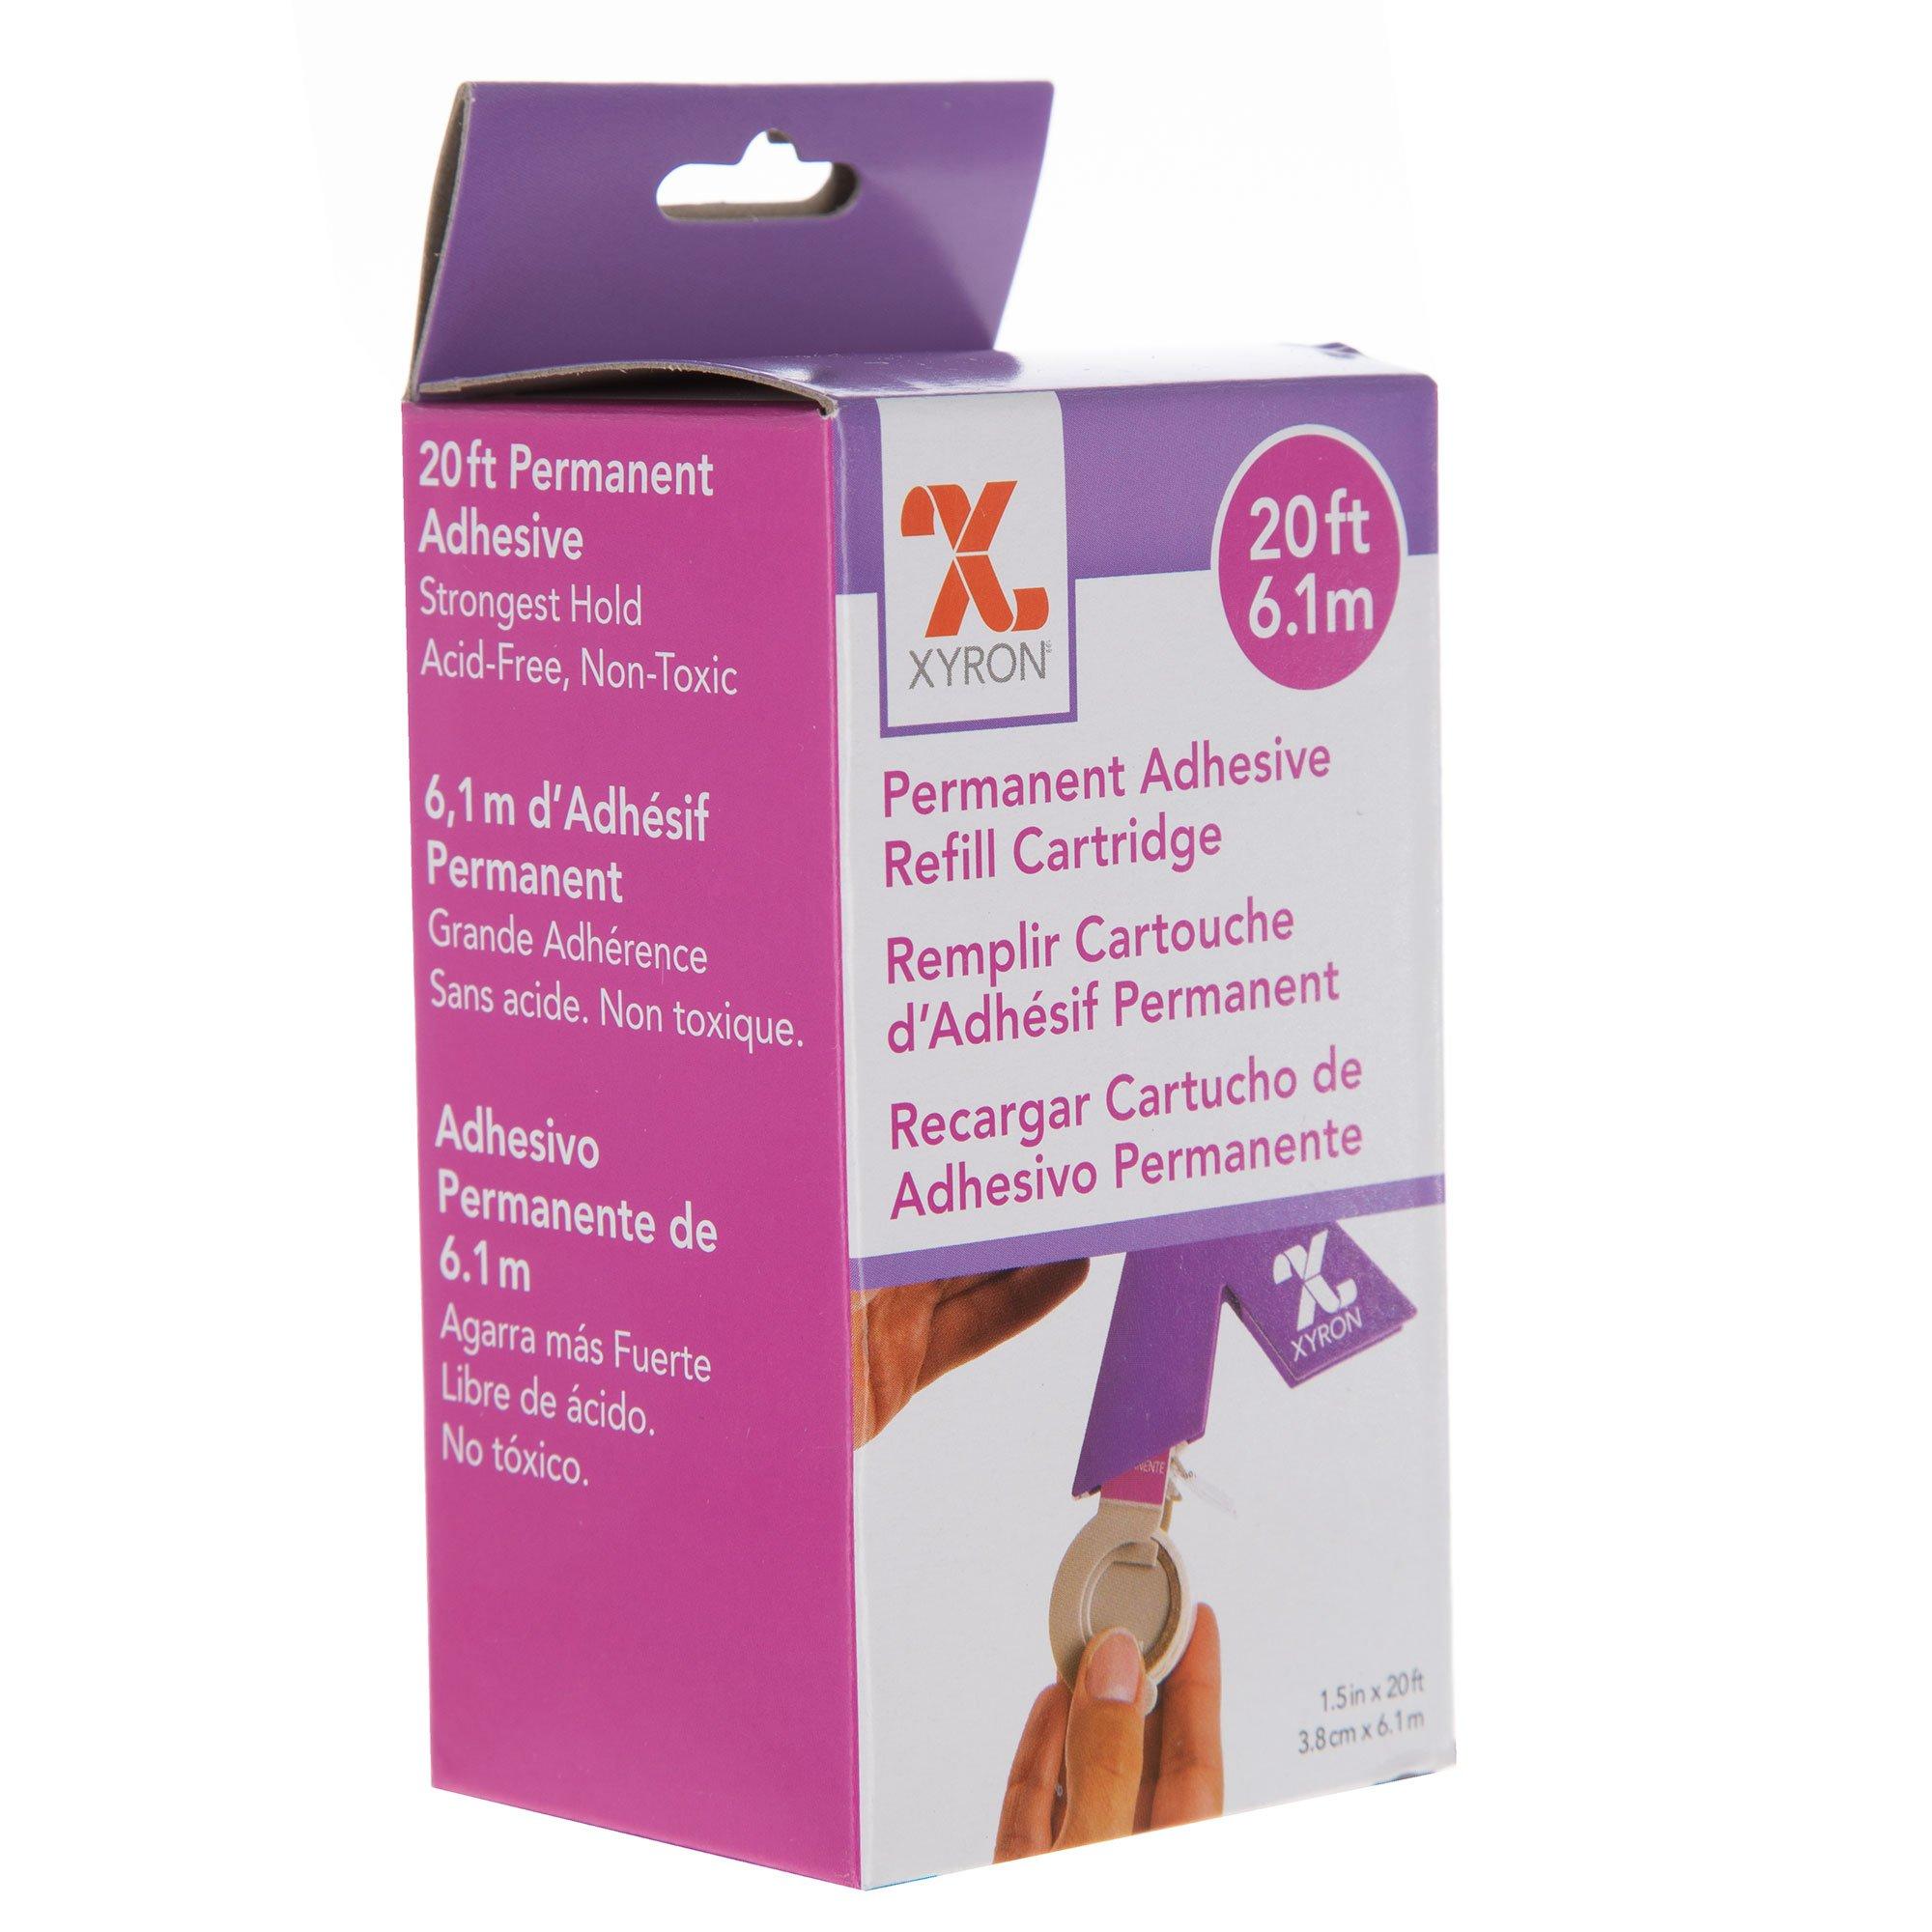 Xyron Permanent Adhesive Refill for Create-A-Sticker Mini, 2.5 x 20', Create-A-Sticker Mini